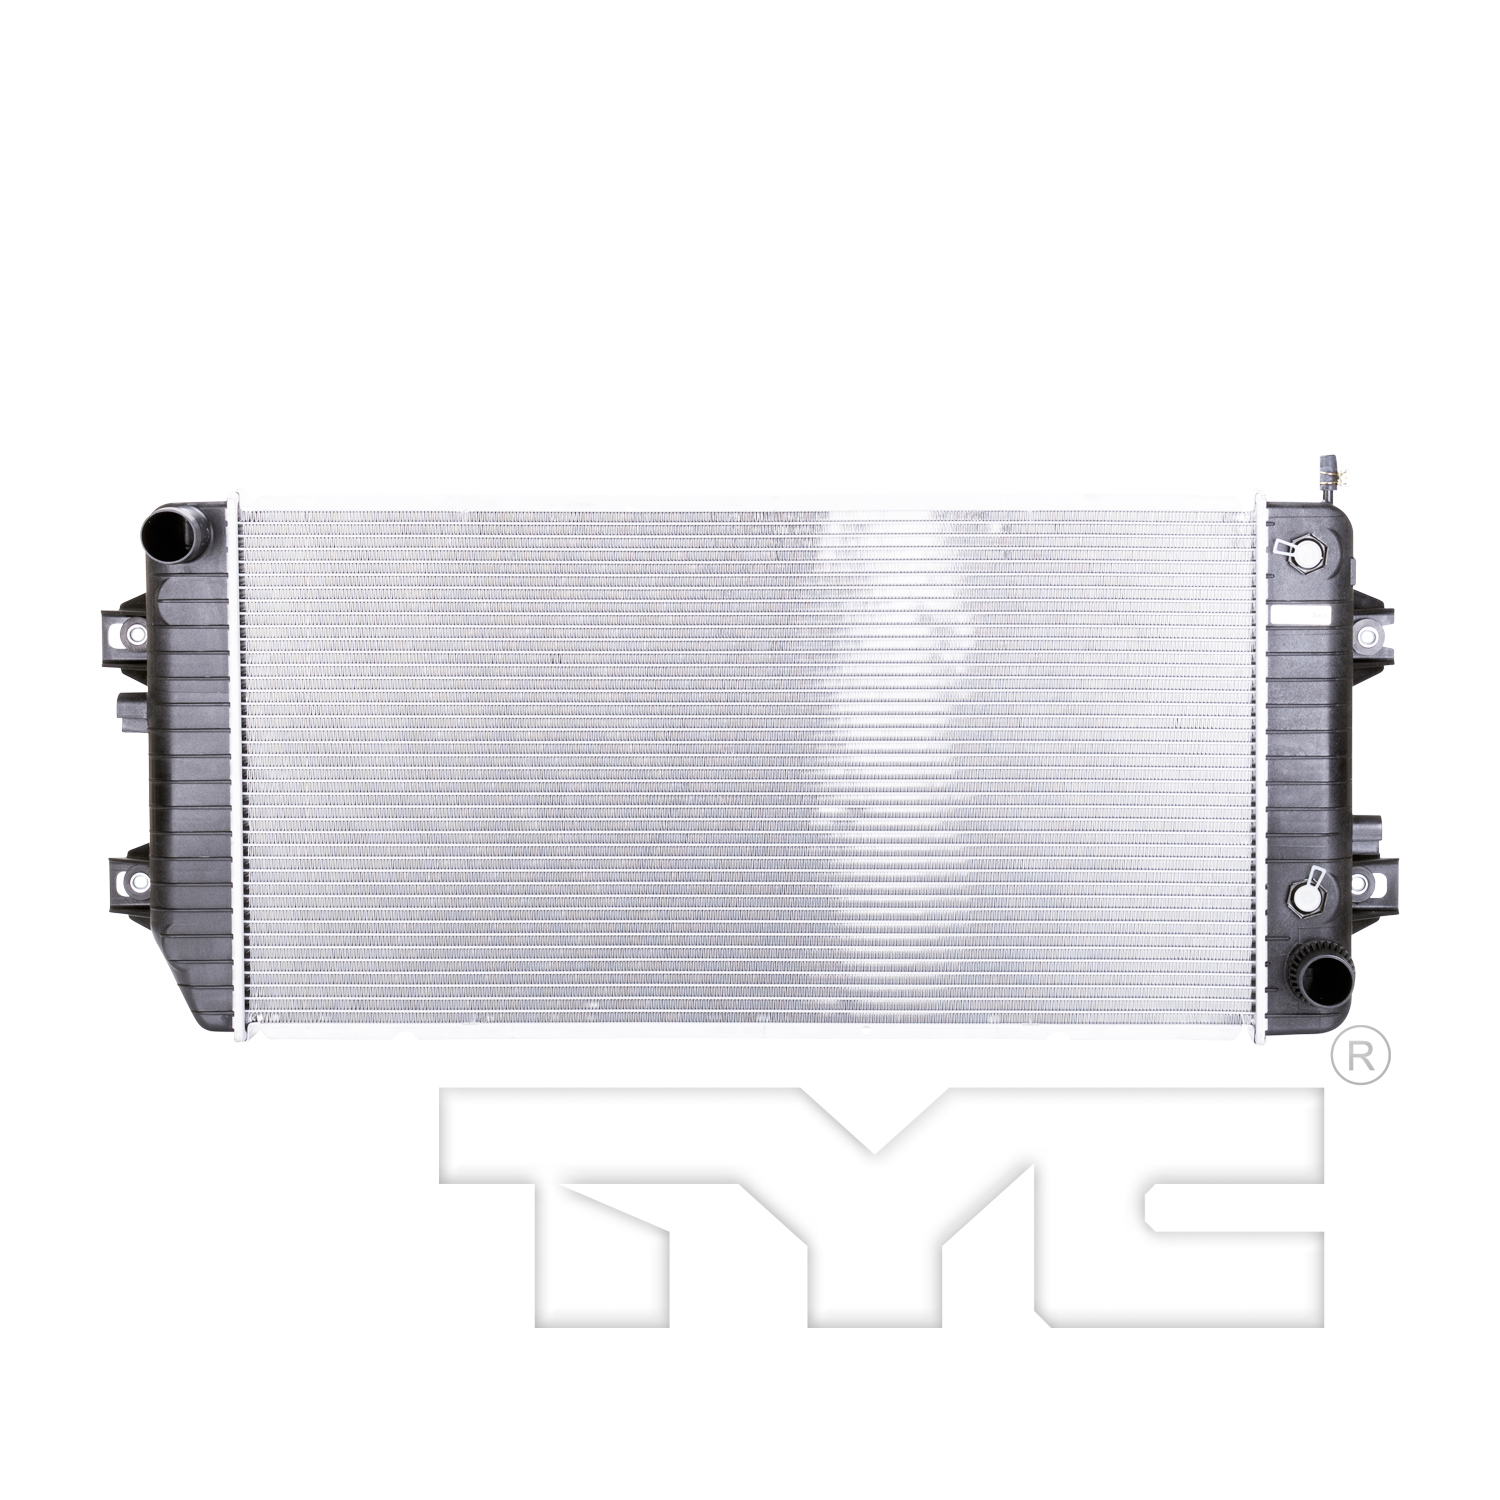 Aftermarket RADIATORS for CHEVROLET - EXPRESS 3500, EXPRESS 3500,03-23,Radiator assembly